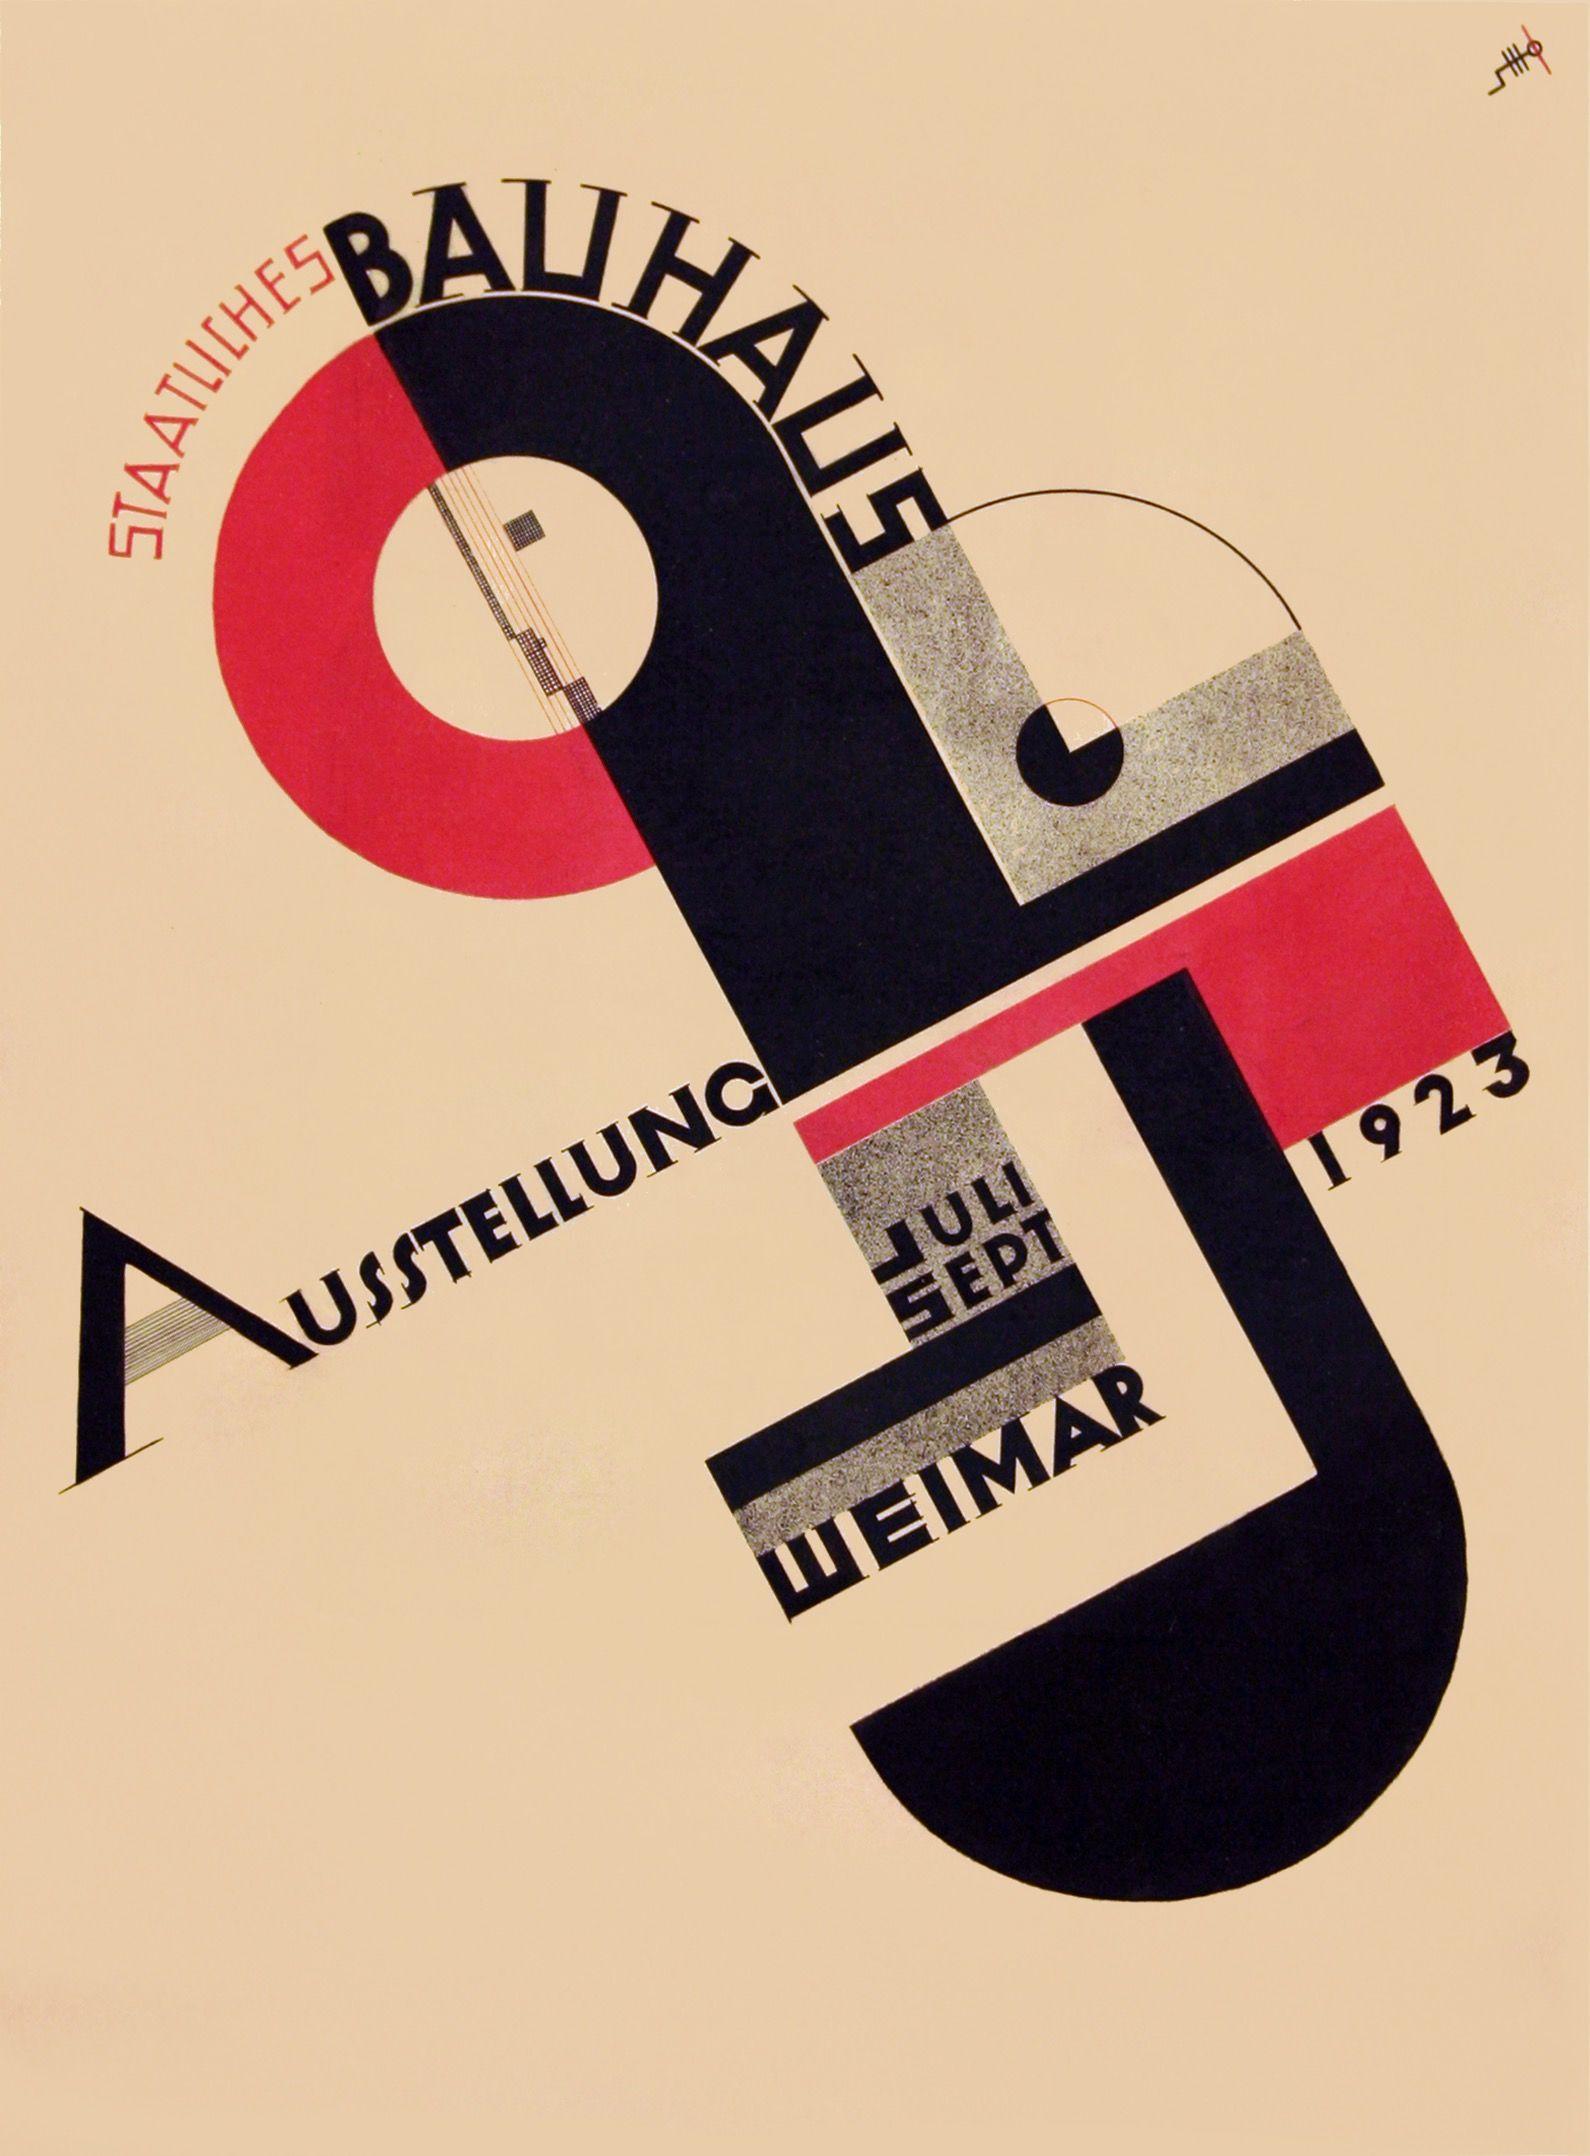 What Is the Bauhaus Design Movement?